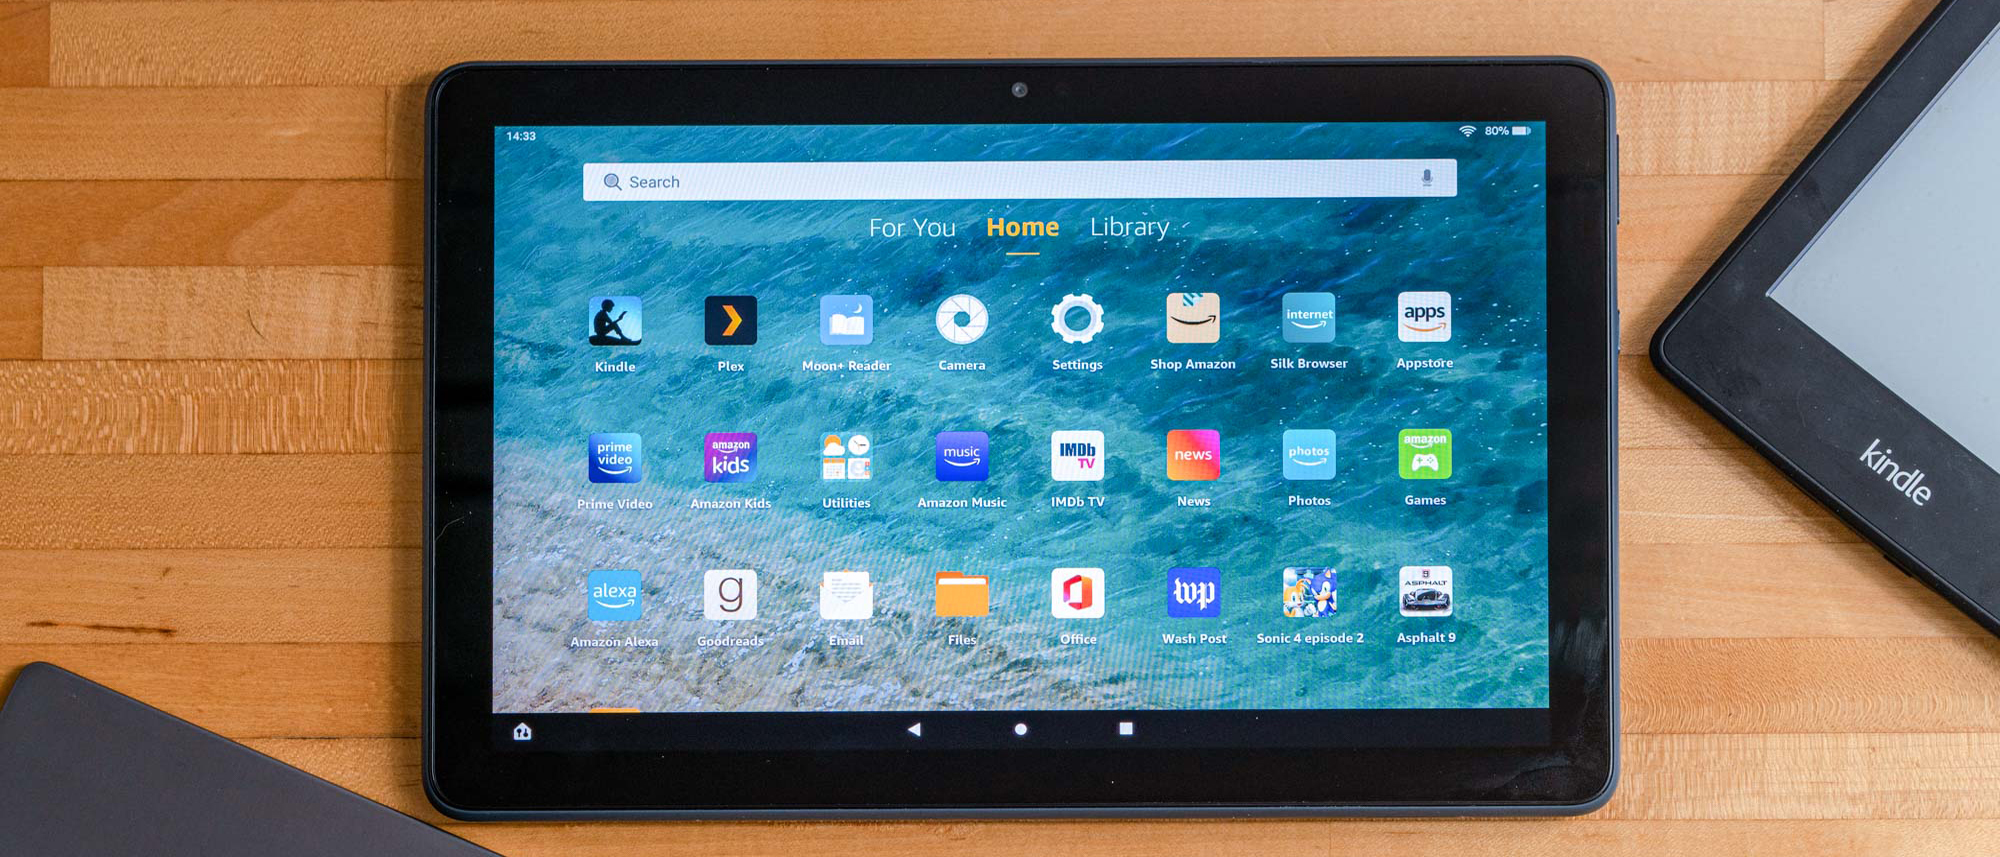 Amazon Fire HD 10 Plus review | Tom's Guide